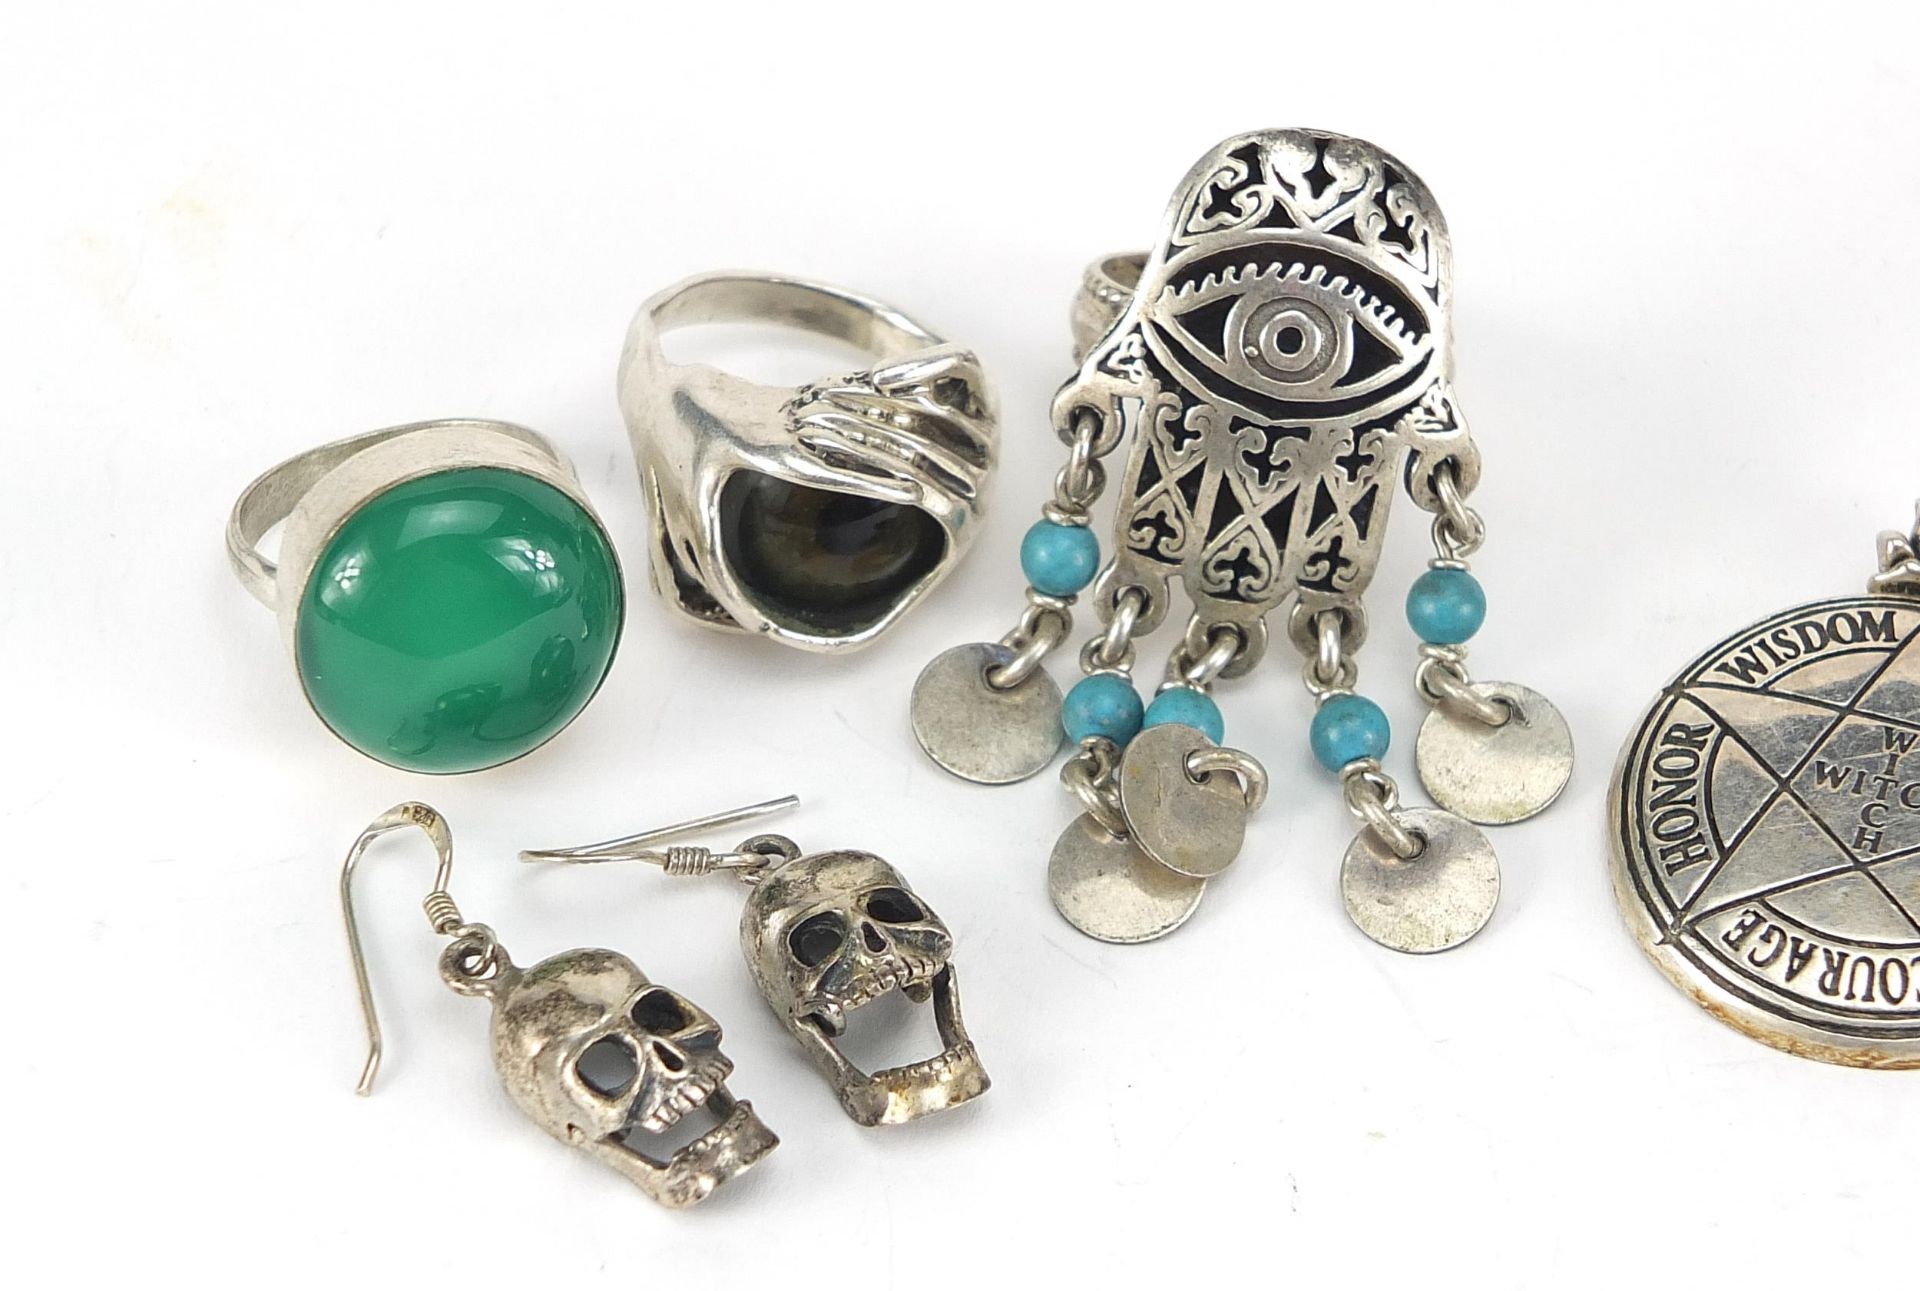 Silver jewellery including human skull design earrings, all seeing eye ring and pendant and a - Image 2 of 6